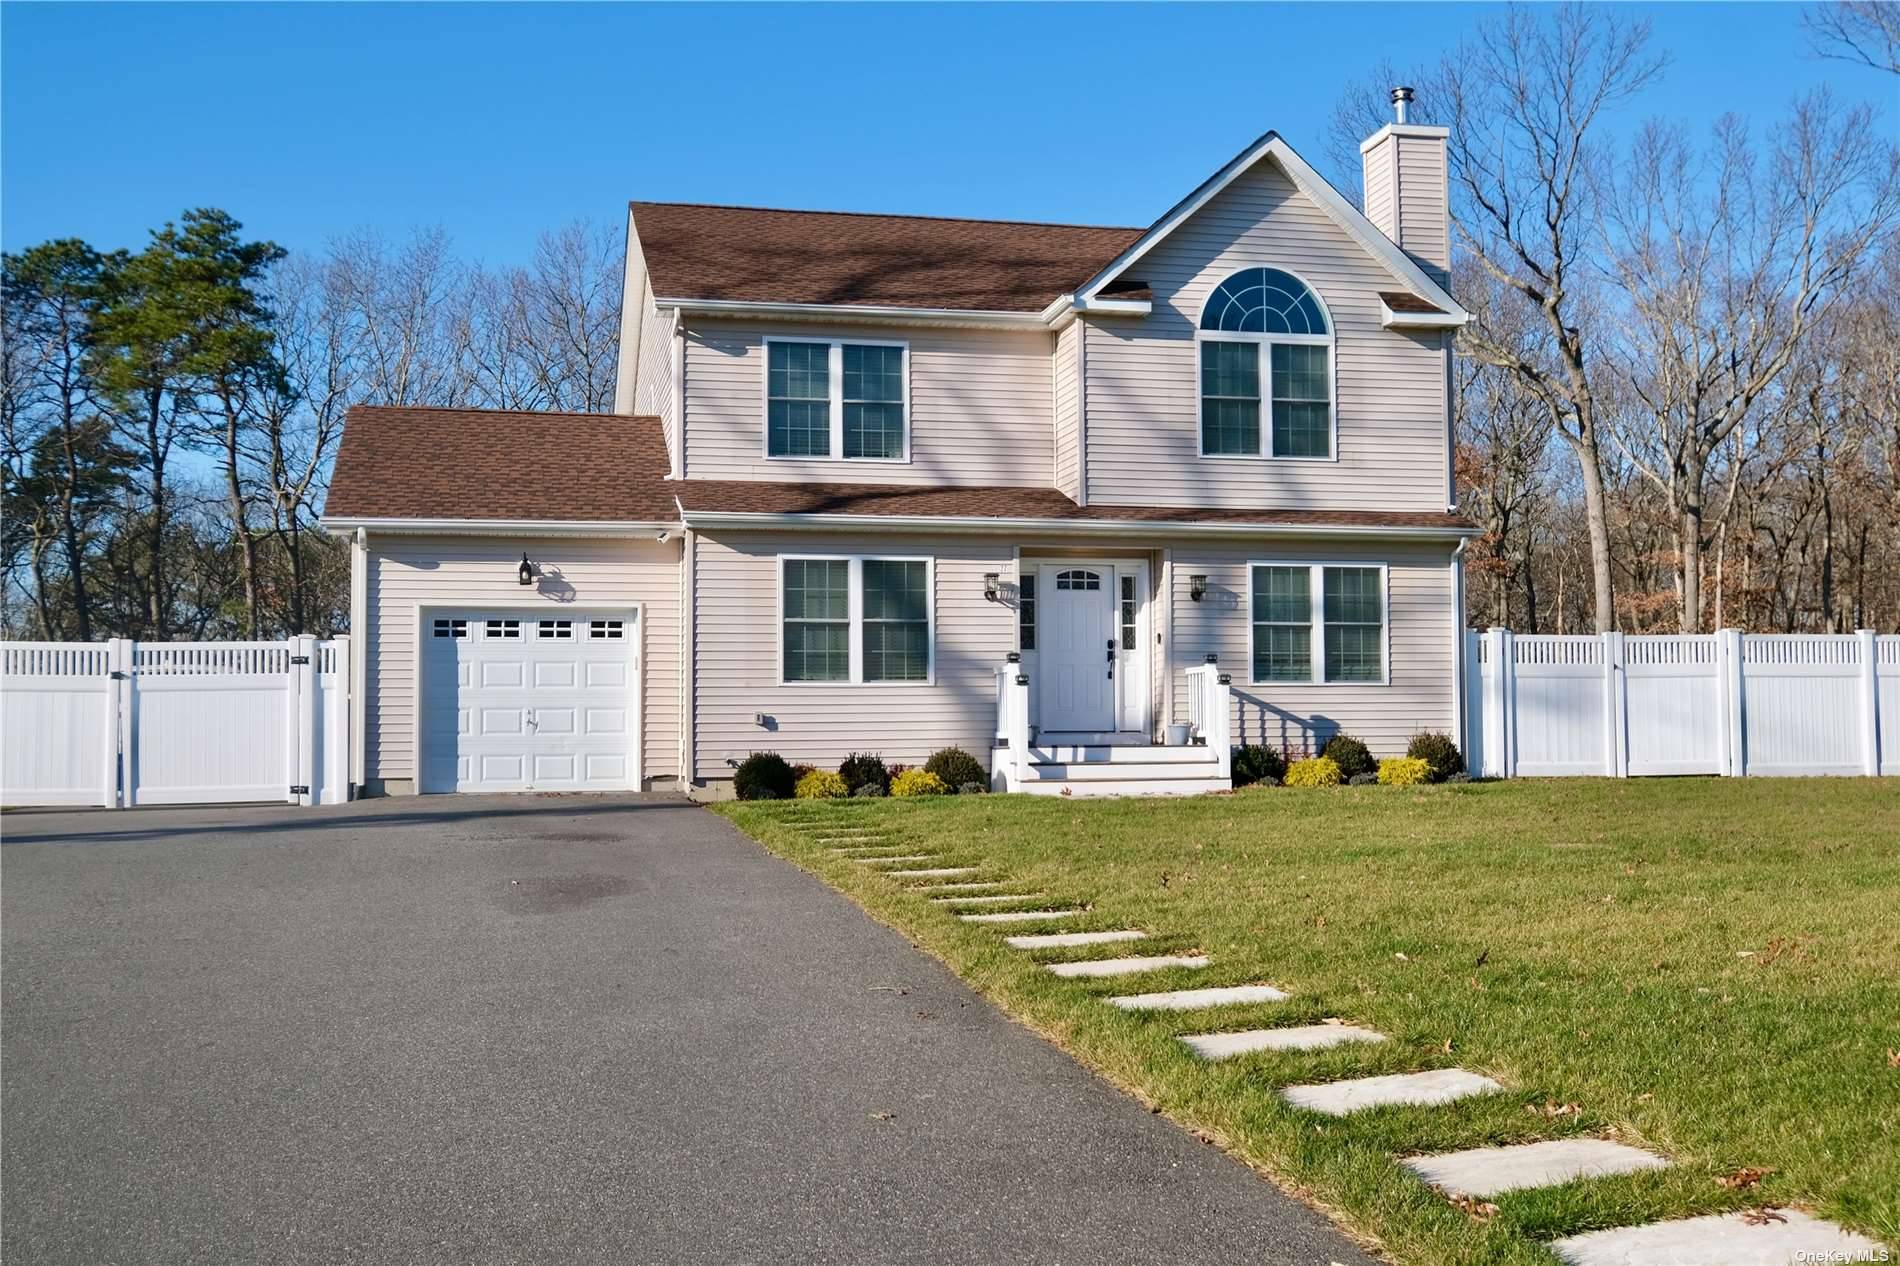 Brand New Construction 4 bedroom 2 1 2 bath colonial on over 1 2 acre of beautiful property.